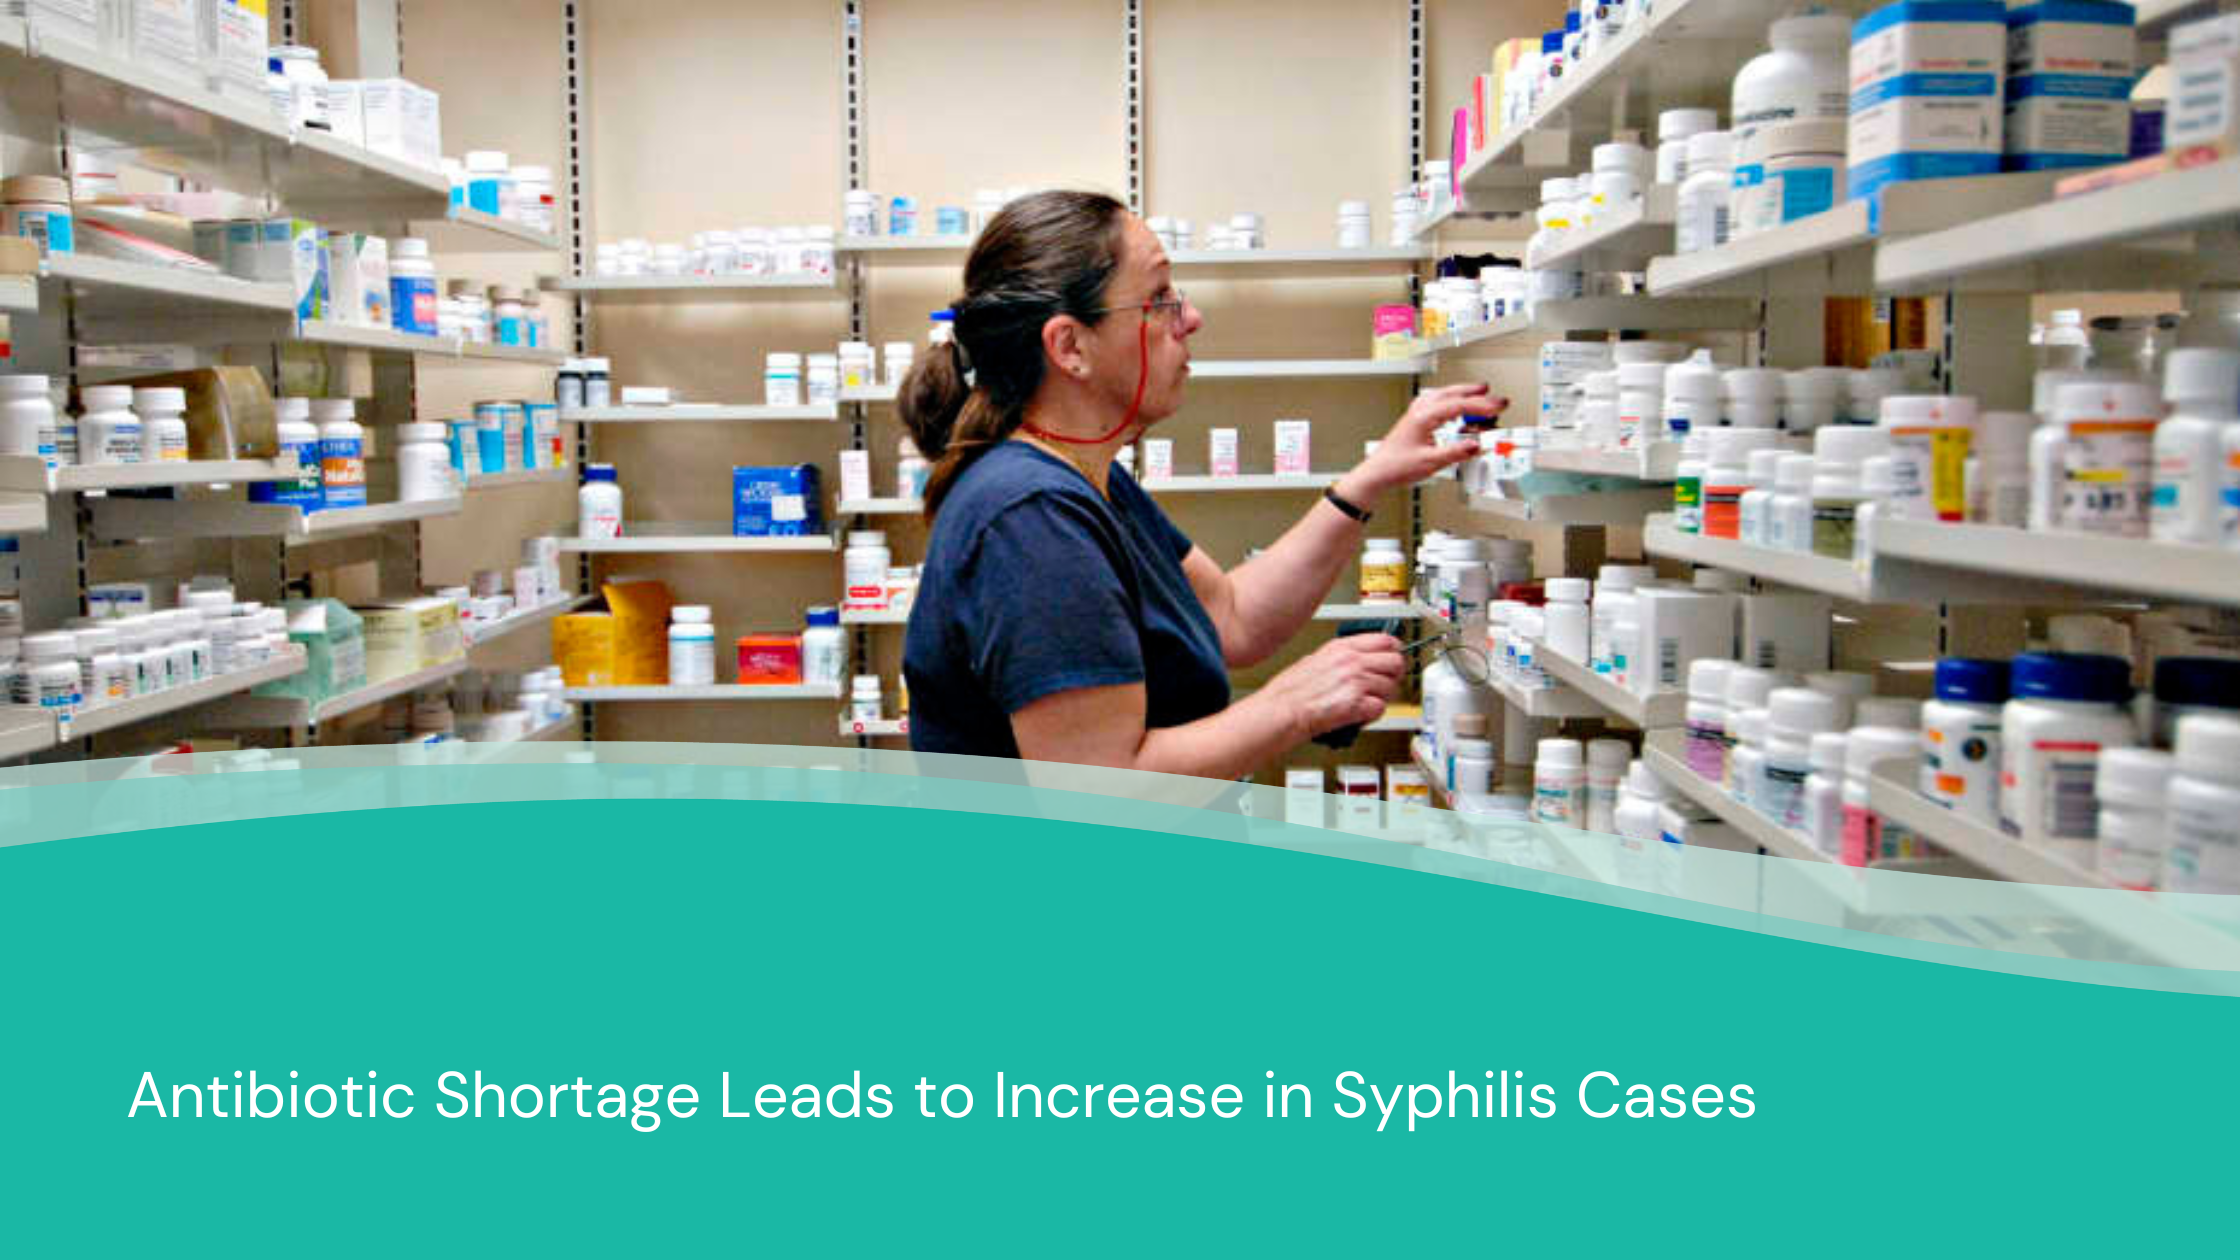 Antibiotic Shortage Leads to Increase in Syphilis Cases